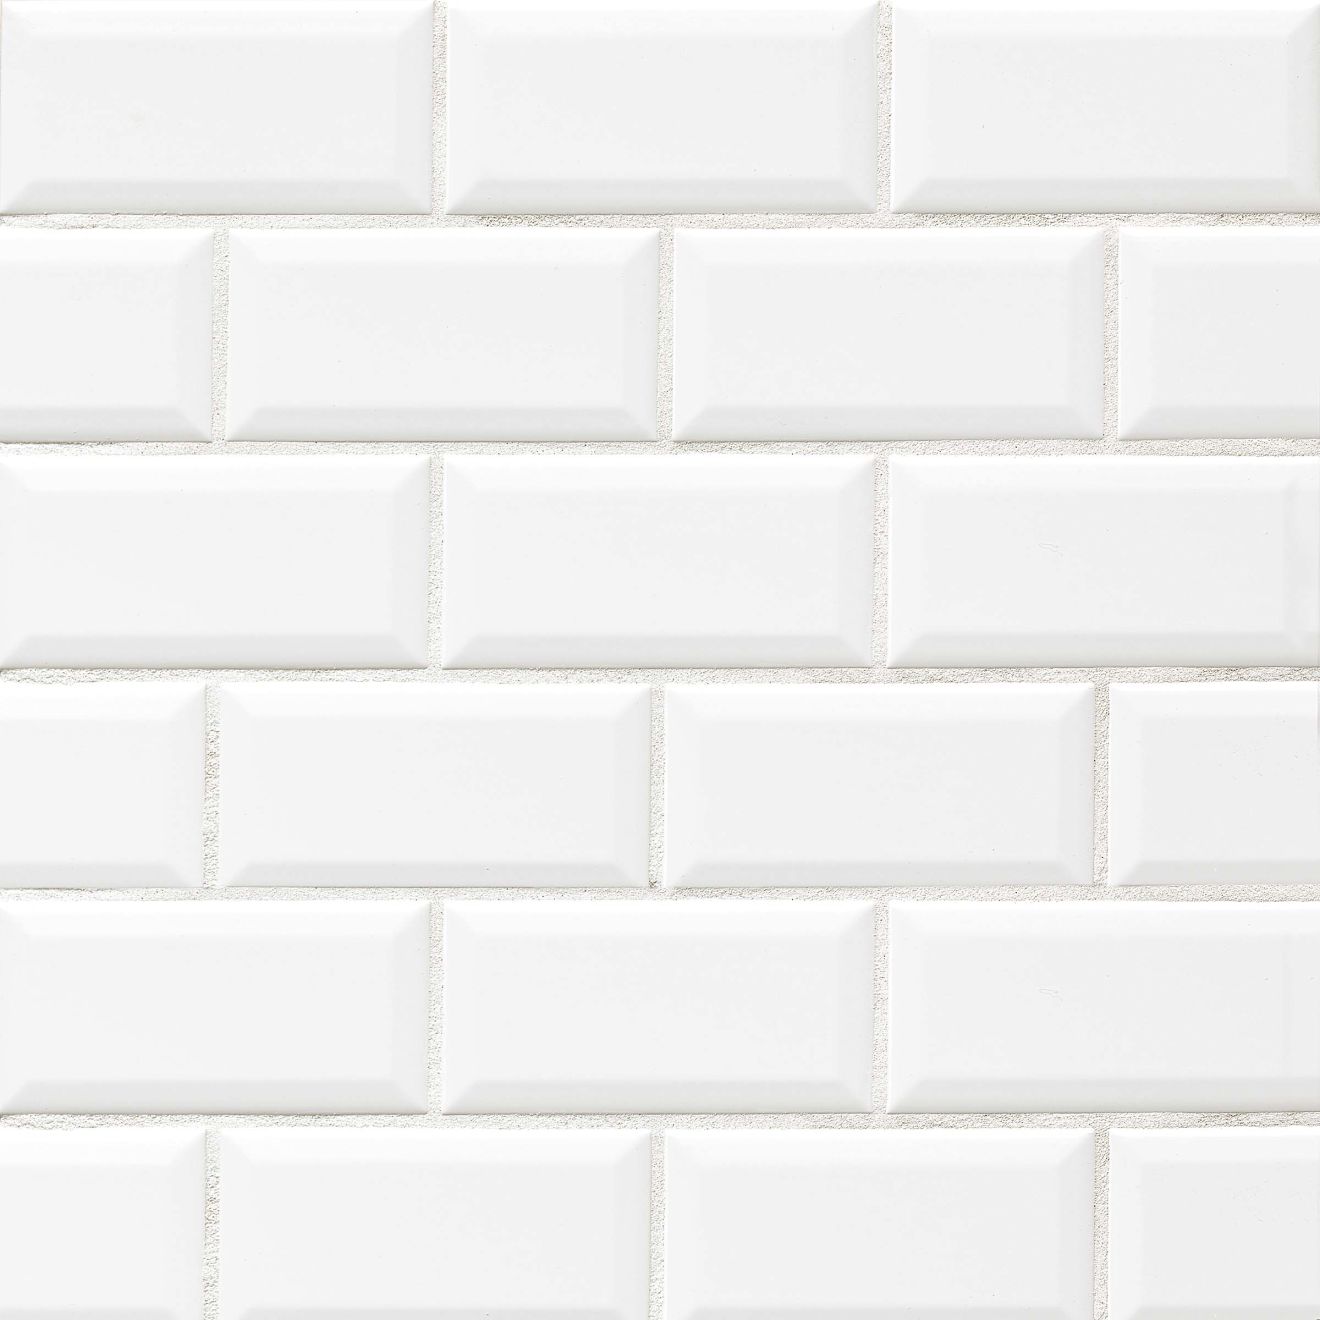 Traditions 4" x 10" Beveled Wall Tile